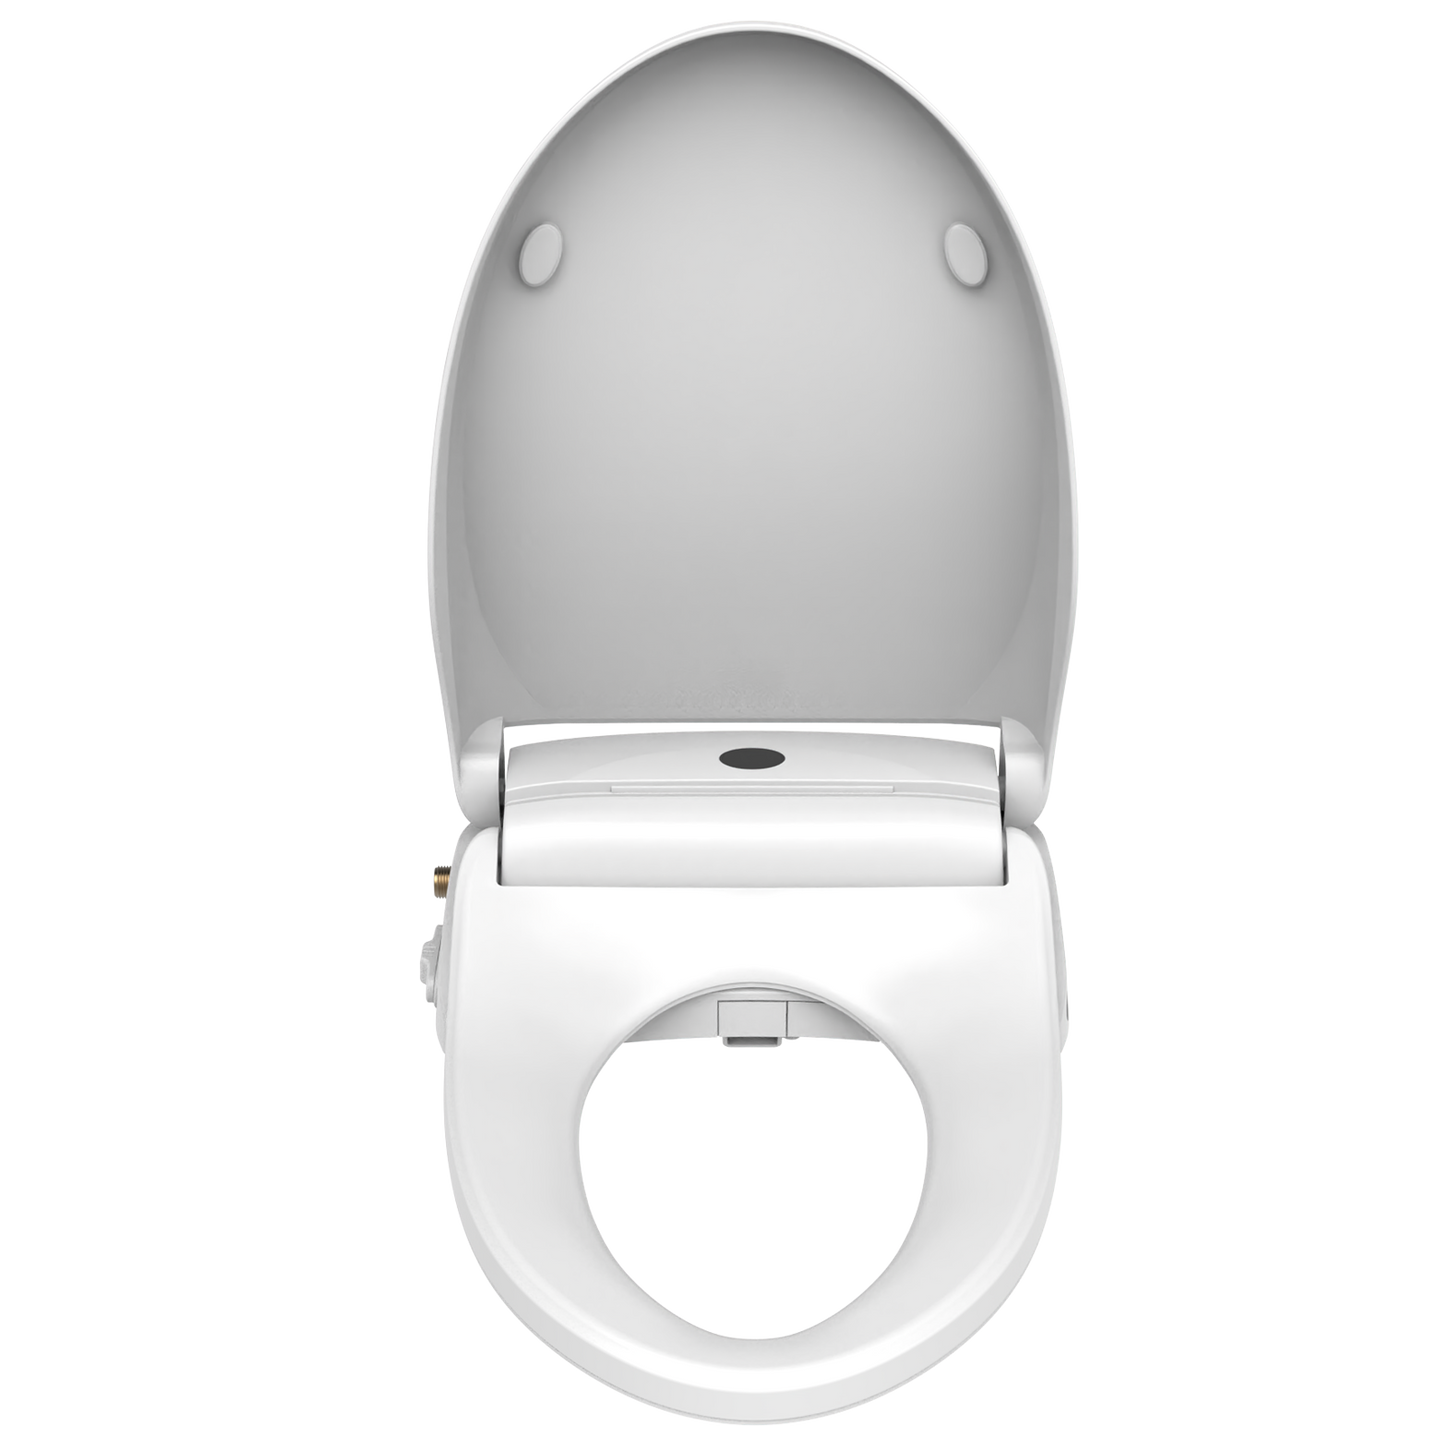 B011 Elongated LED Light Electric Bidet Toilet Seat Heated Toilet Seat with Warm Air Dryer and Night Light